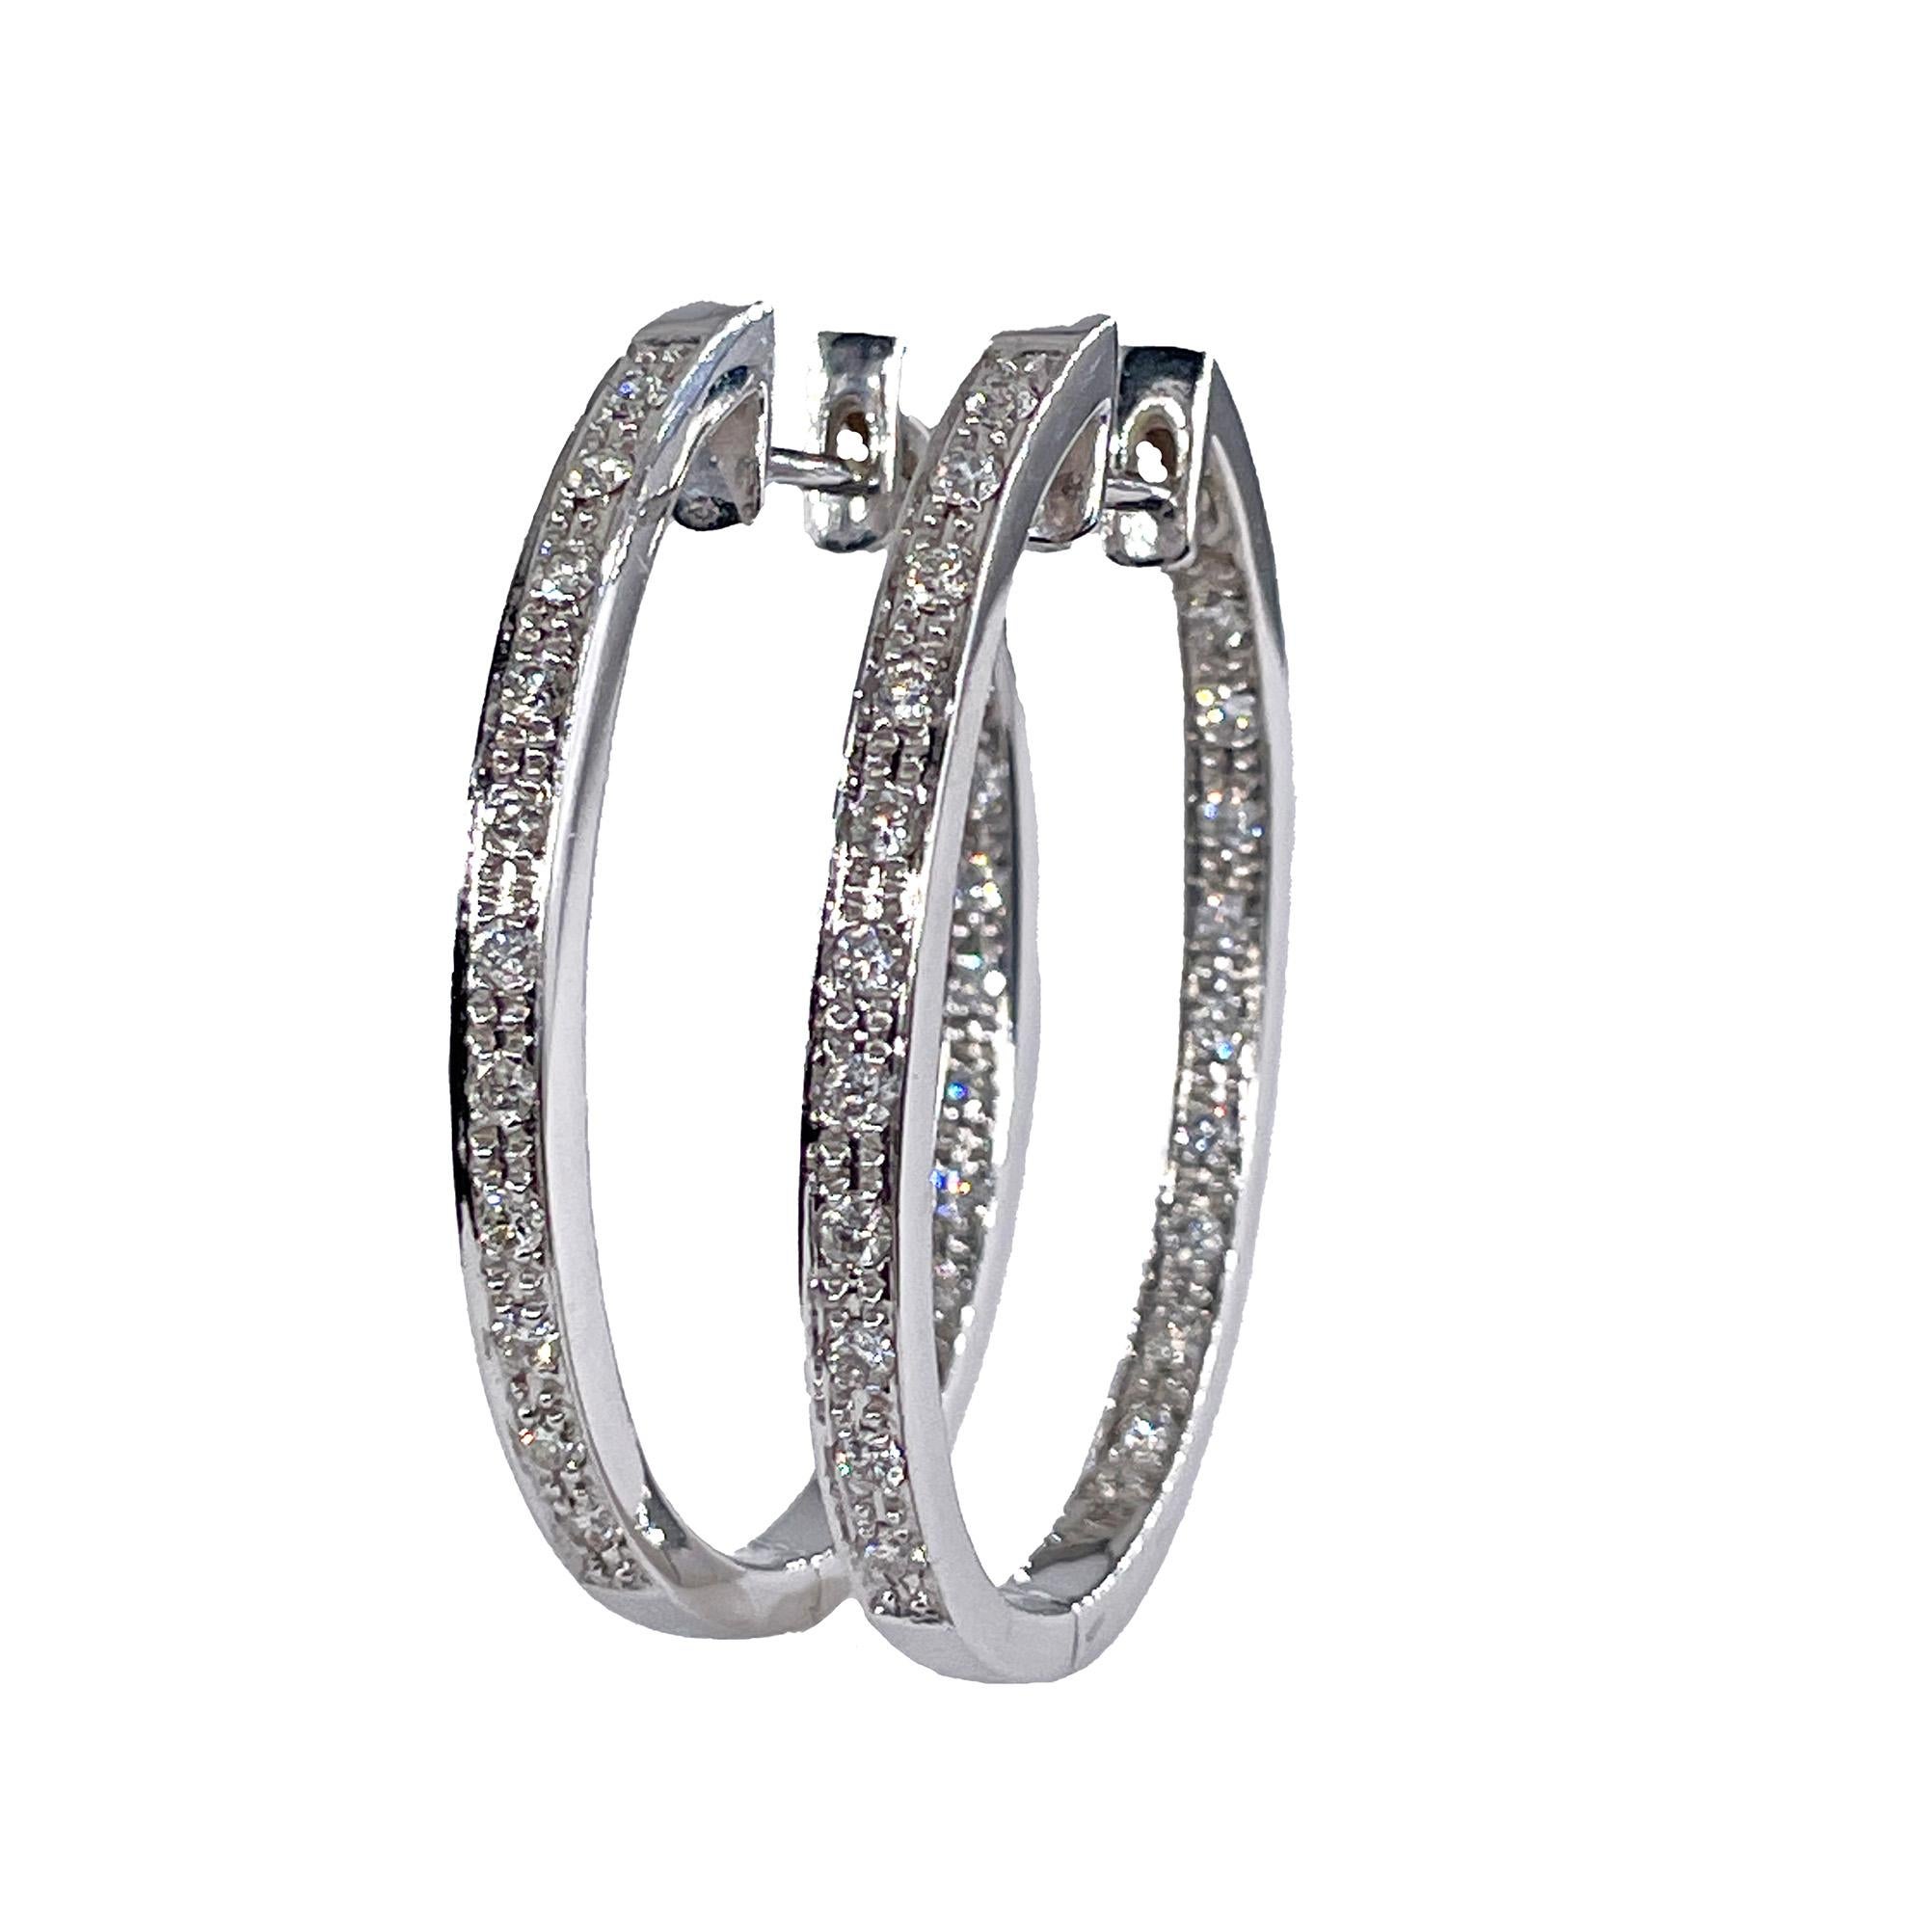 Oval Sonia B Bitton 1.1ct Diamond Inside Out 14k White Gold Hoop Estate Earrings In Good Condition For Sale In New York, NY